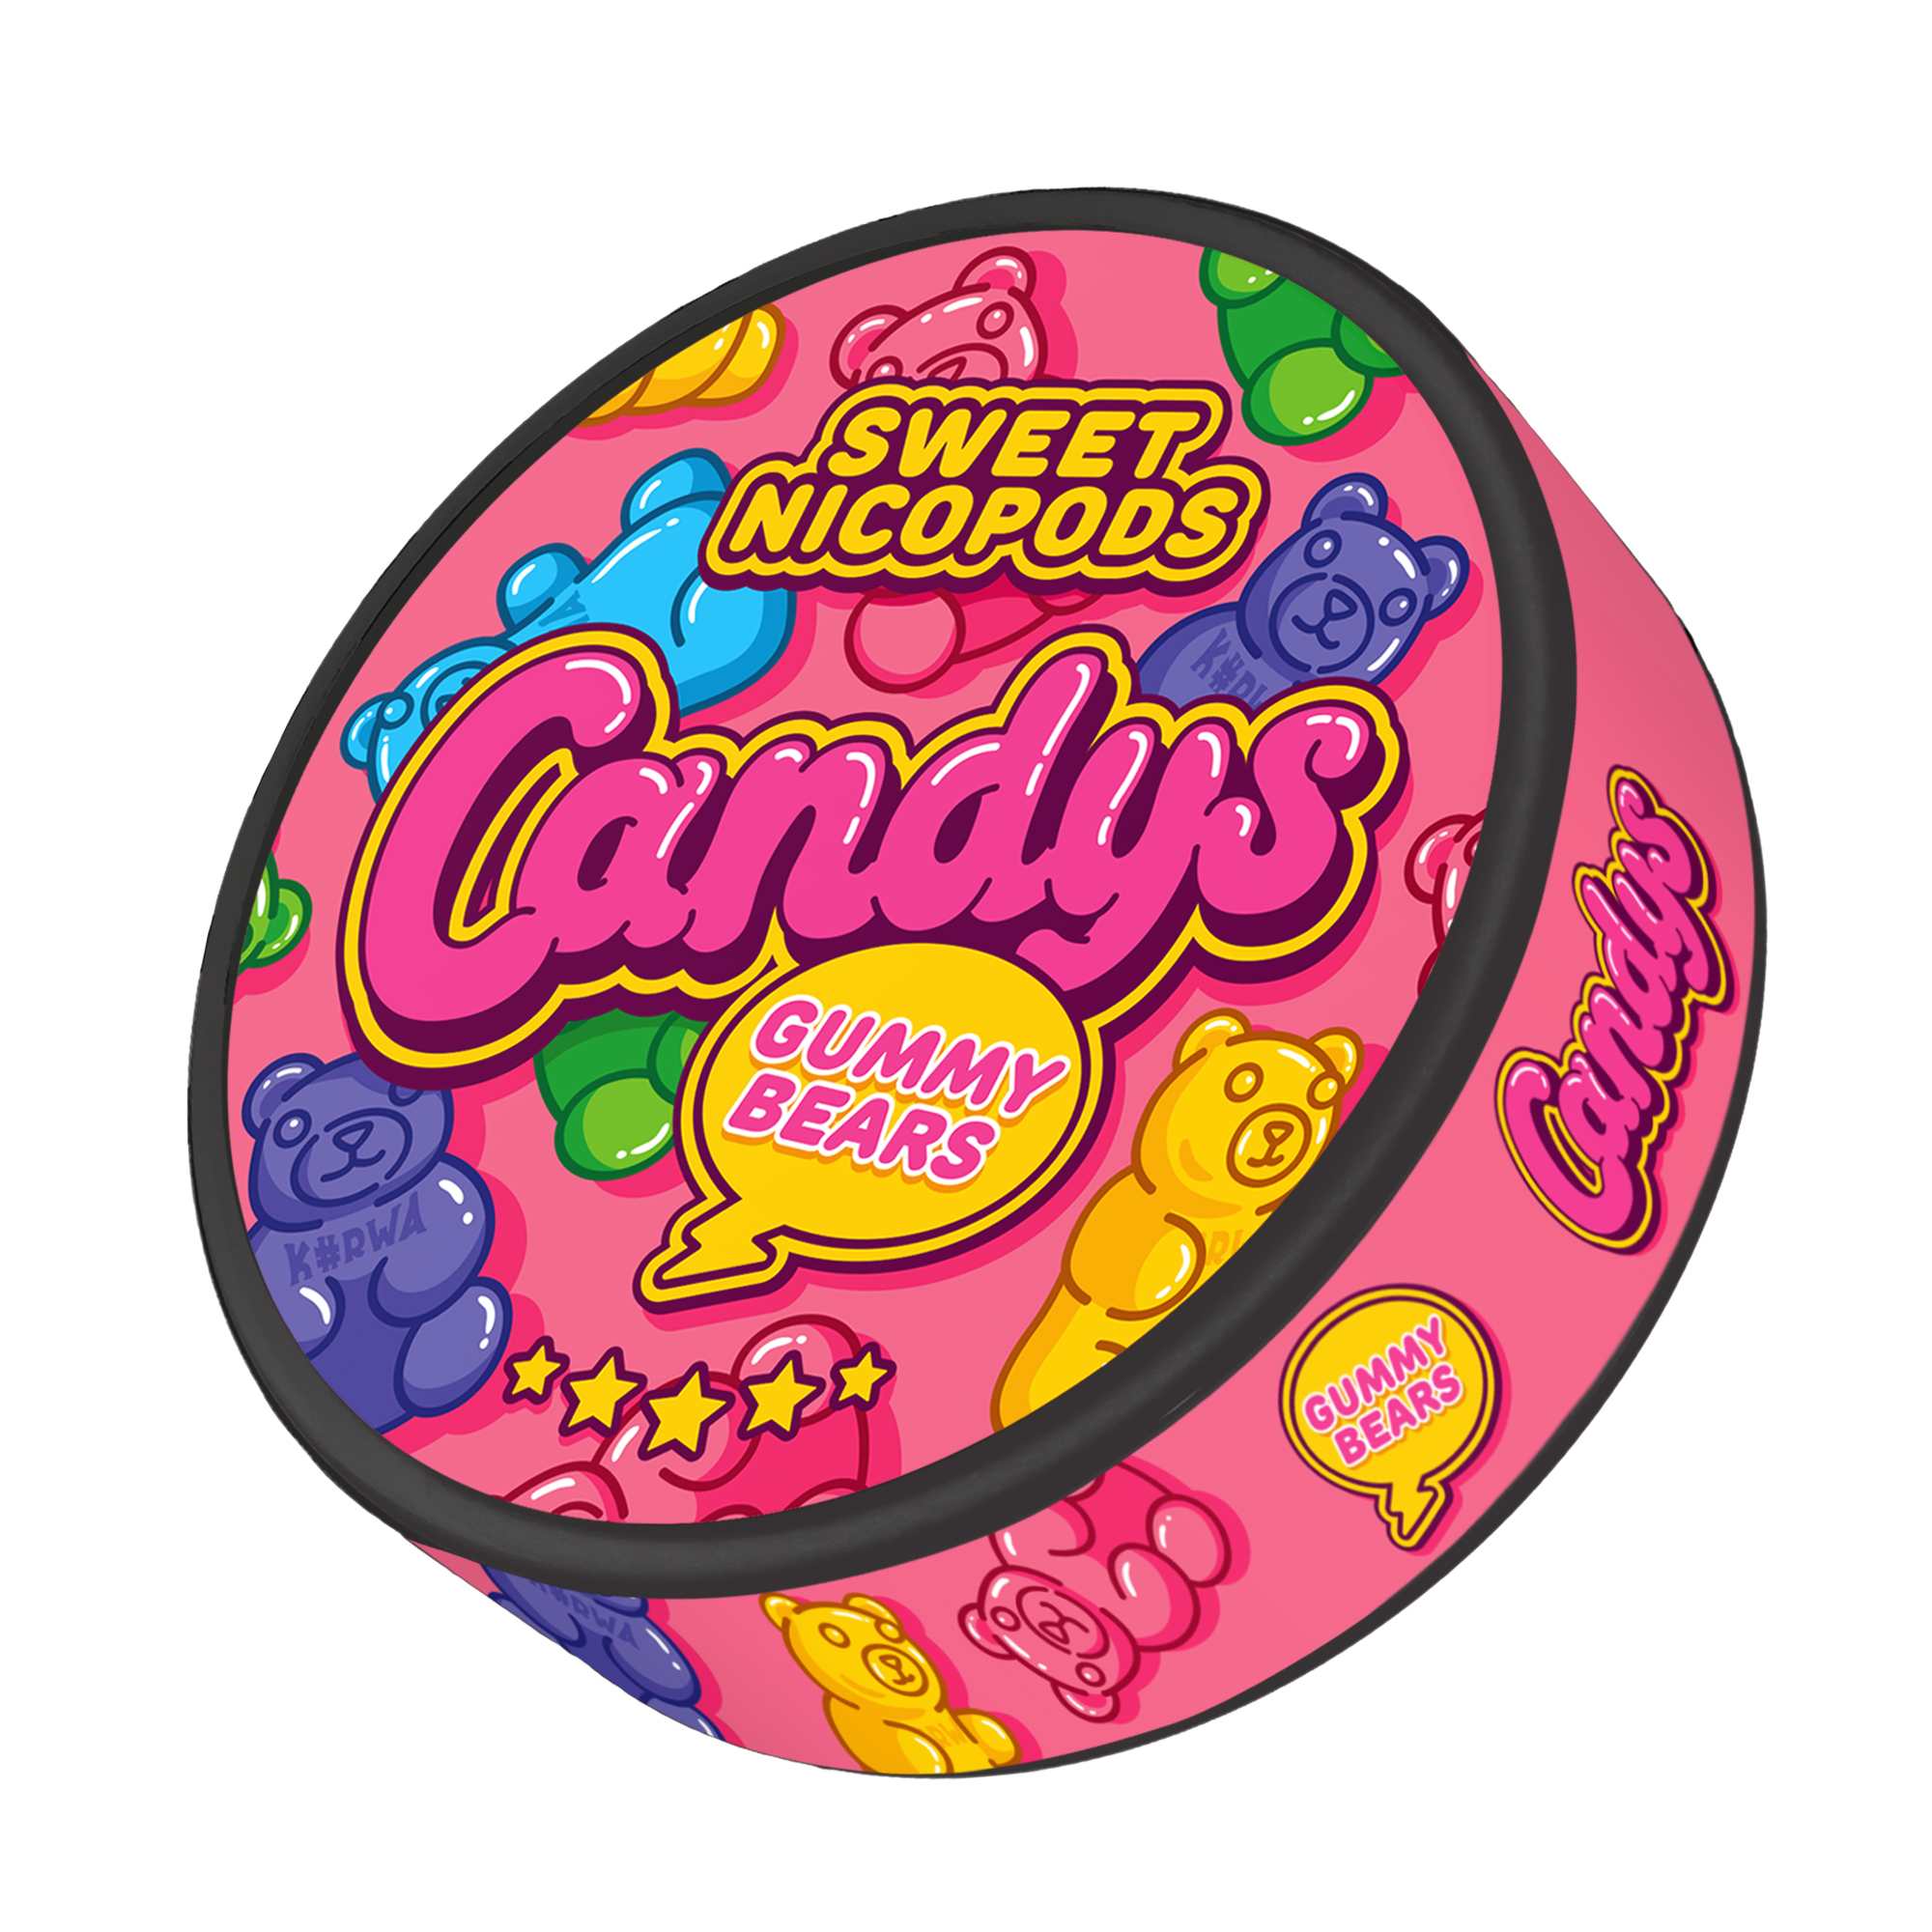 Candy’s Gummy bears Nicotine Pouches, Snus 46.9mg/g